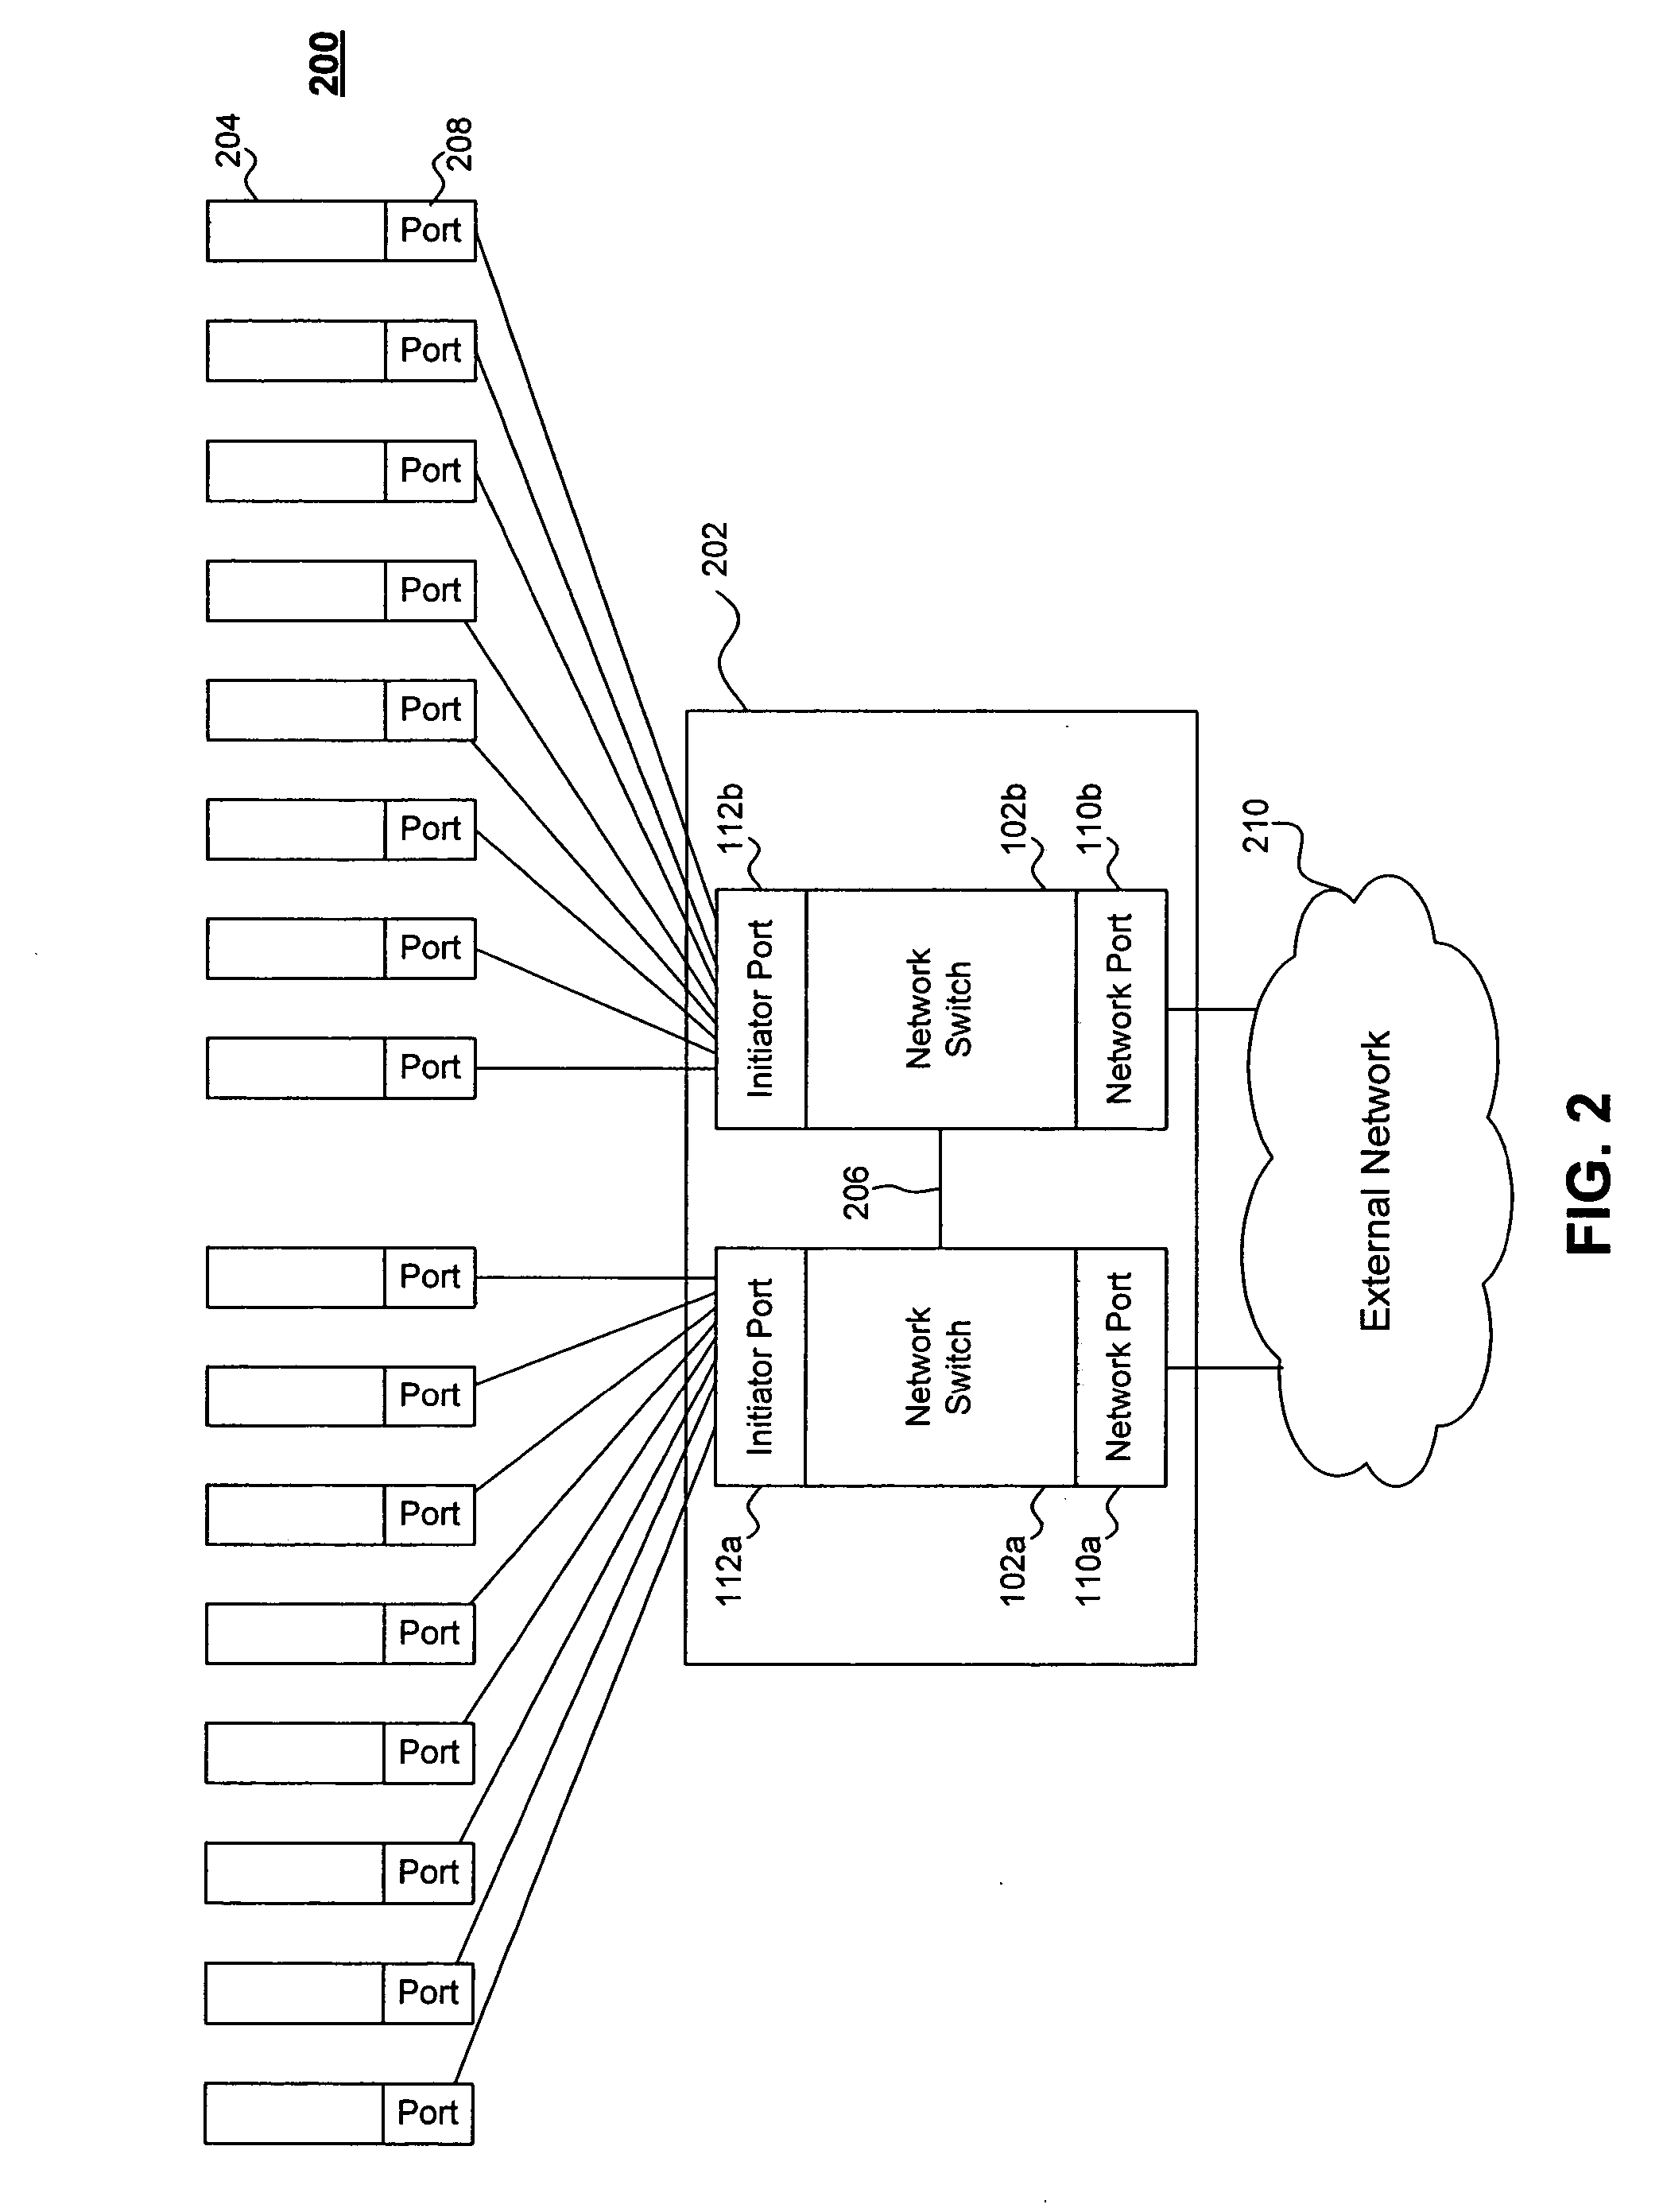 Apparatus and system for coupling and decoupling initiator devices to a network using an arbitrated loop without disrupting the network